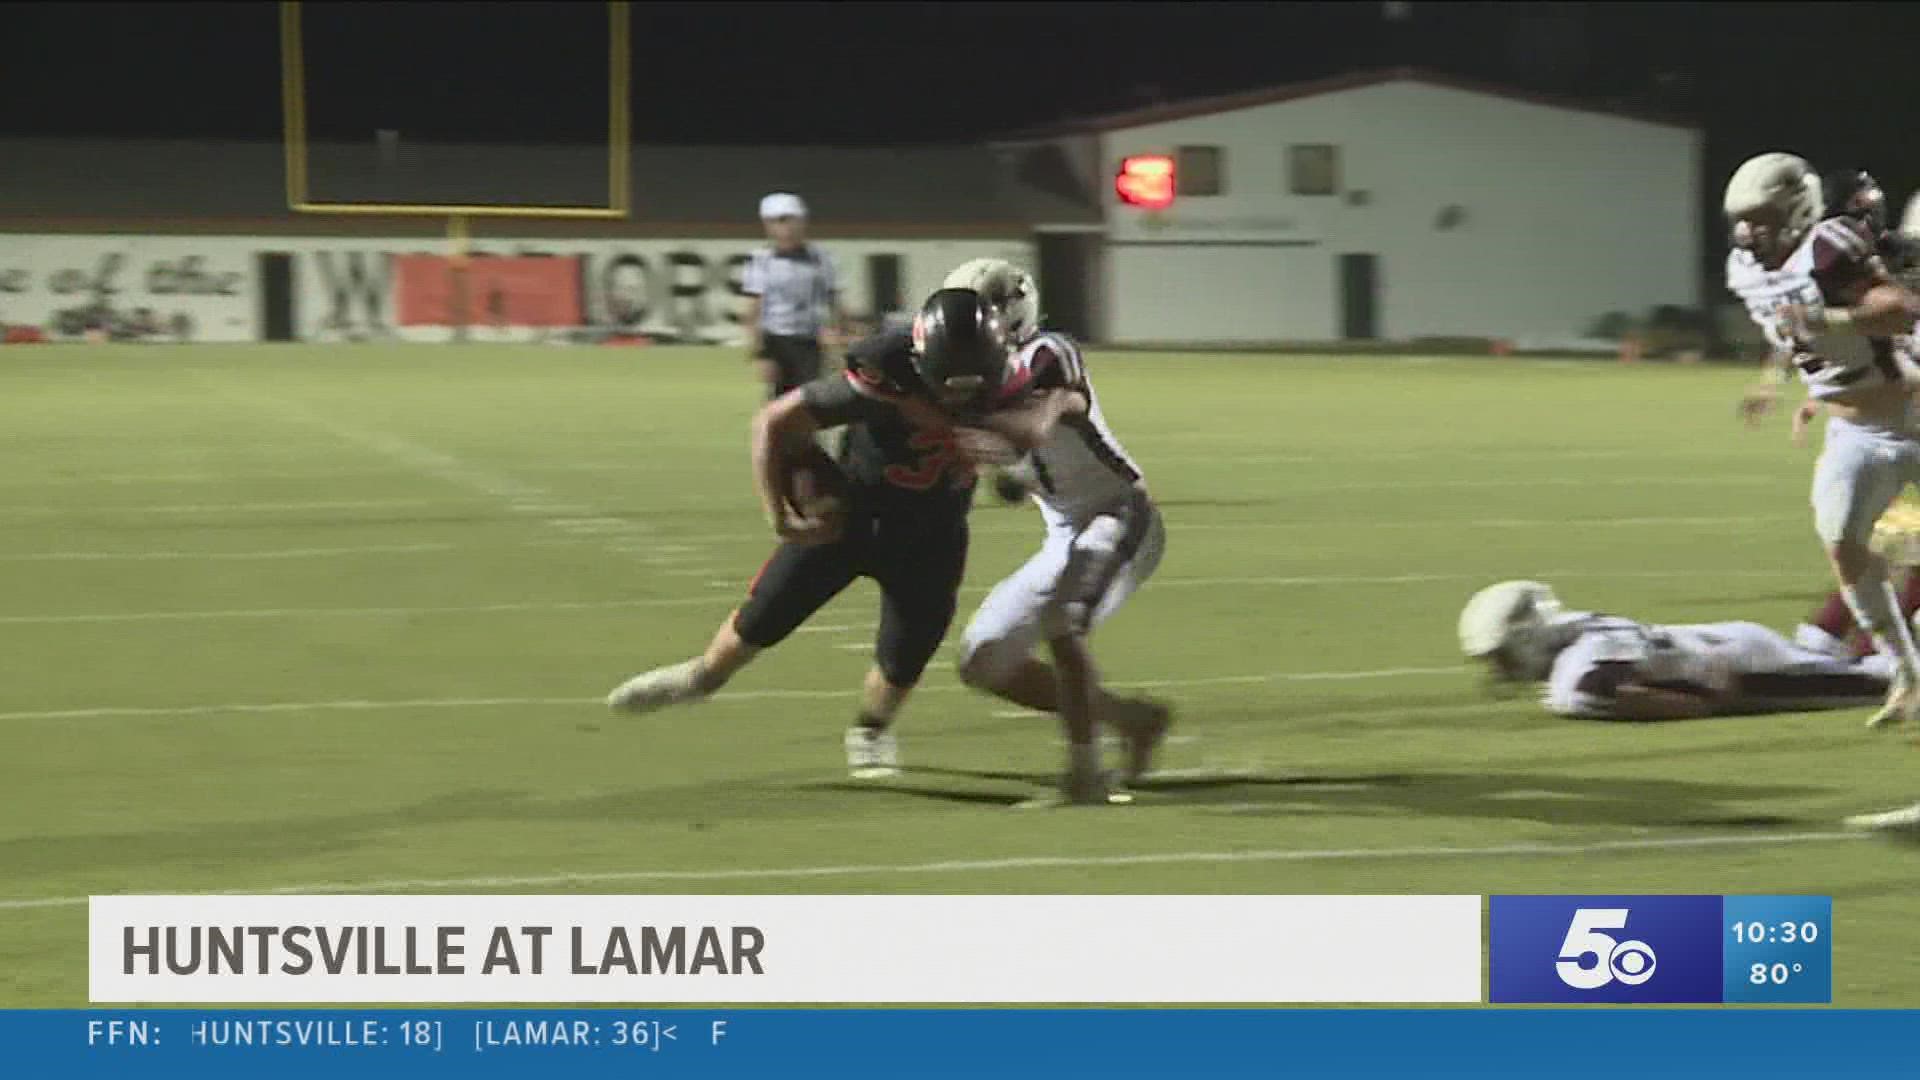 Lamar starts the season with a win over the Eagles